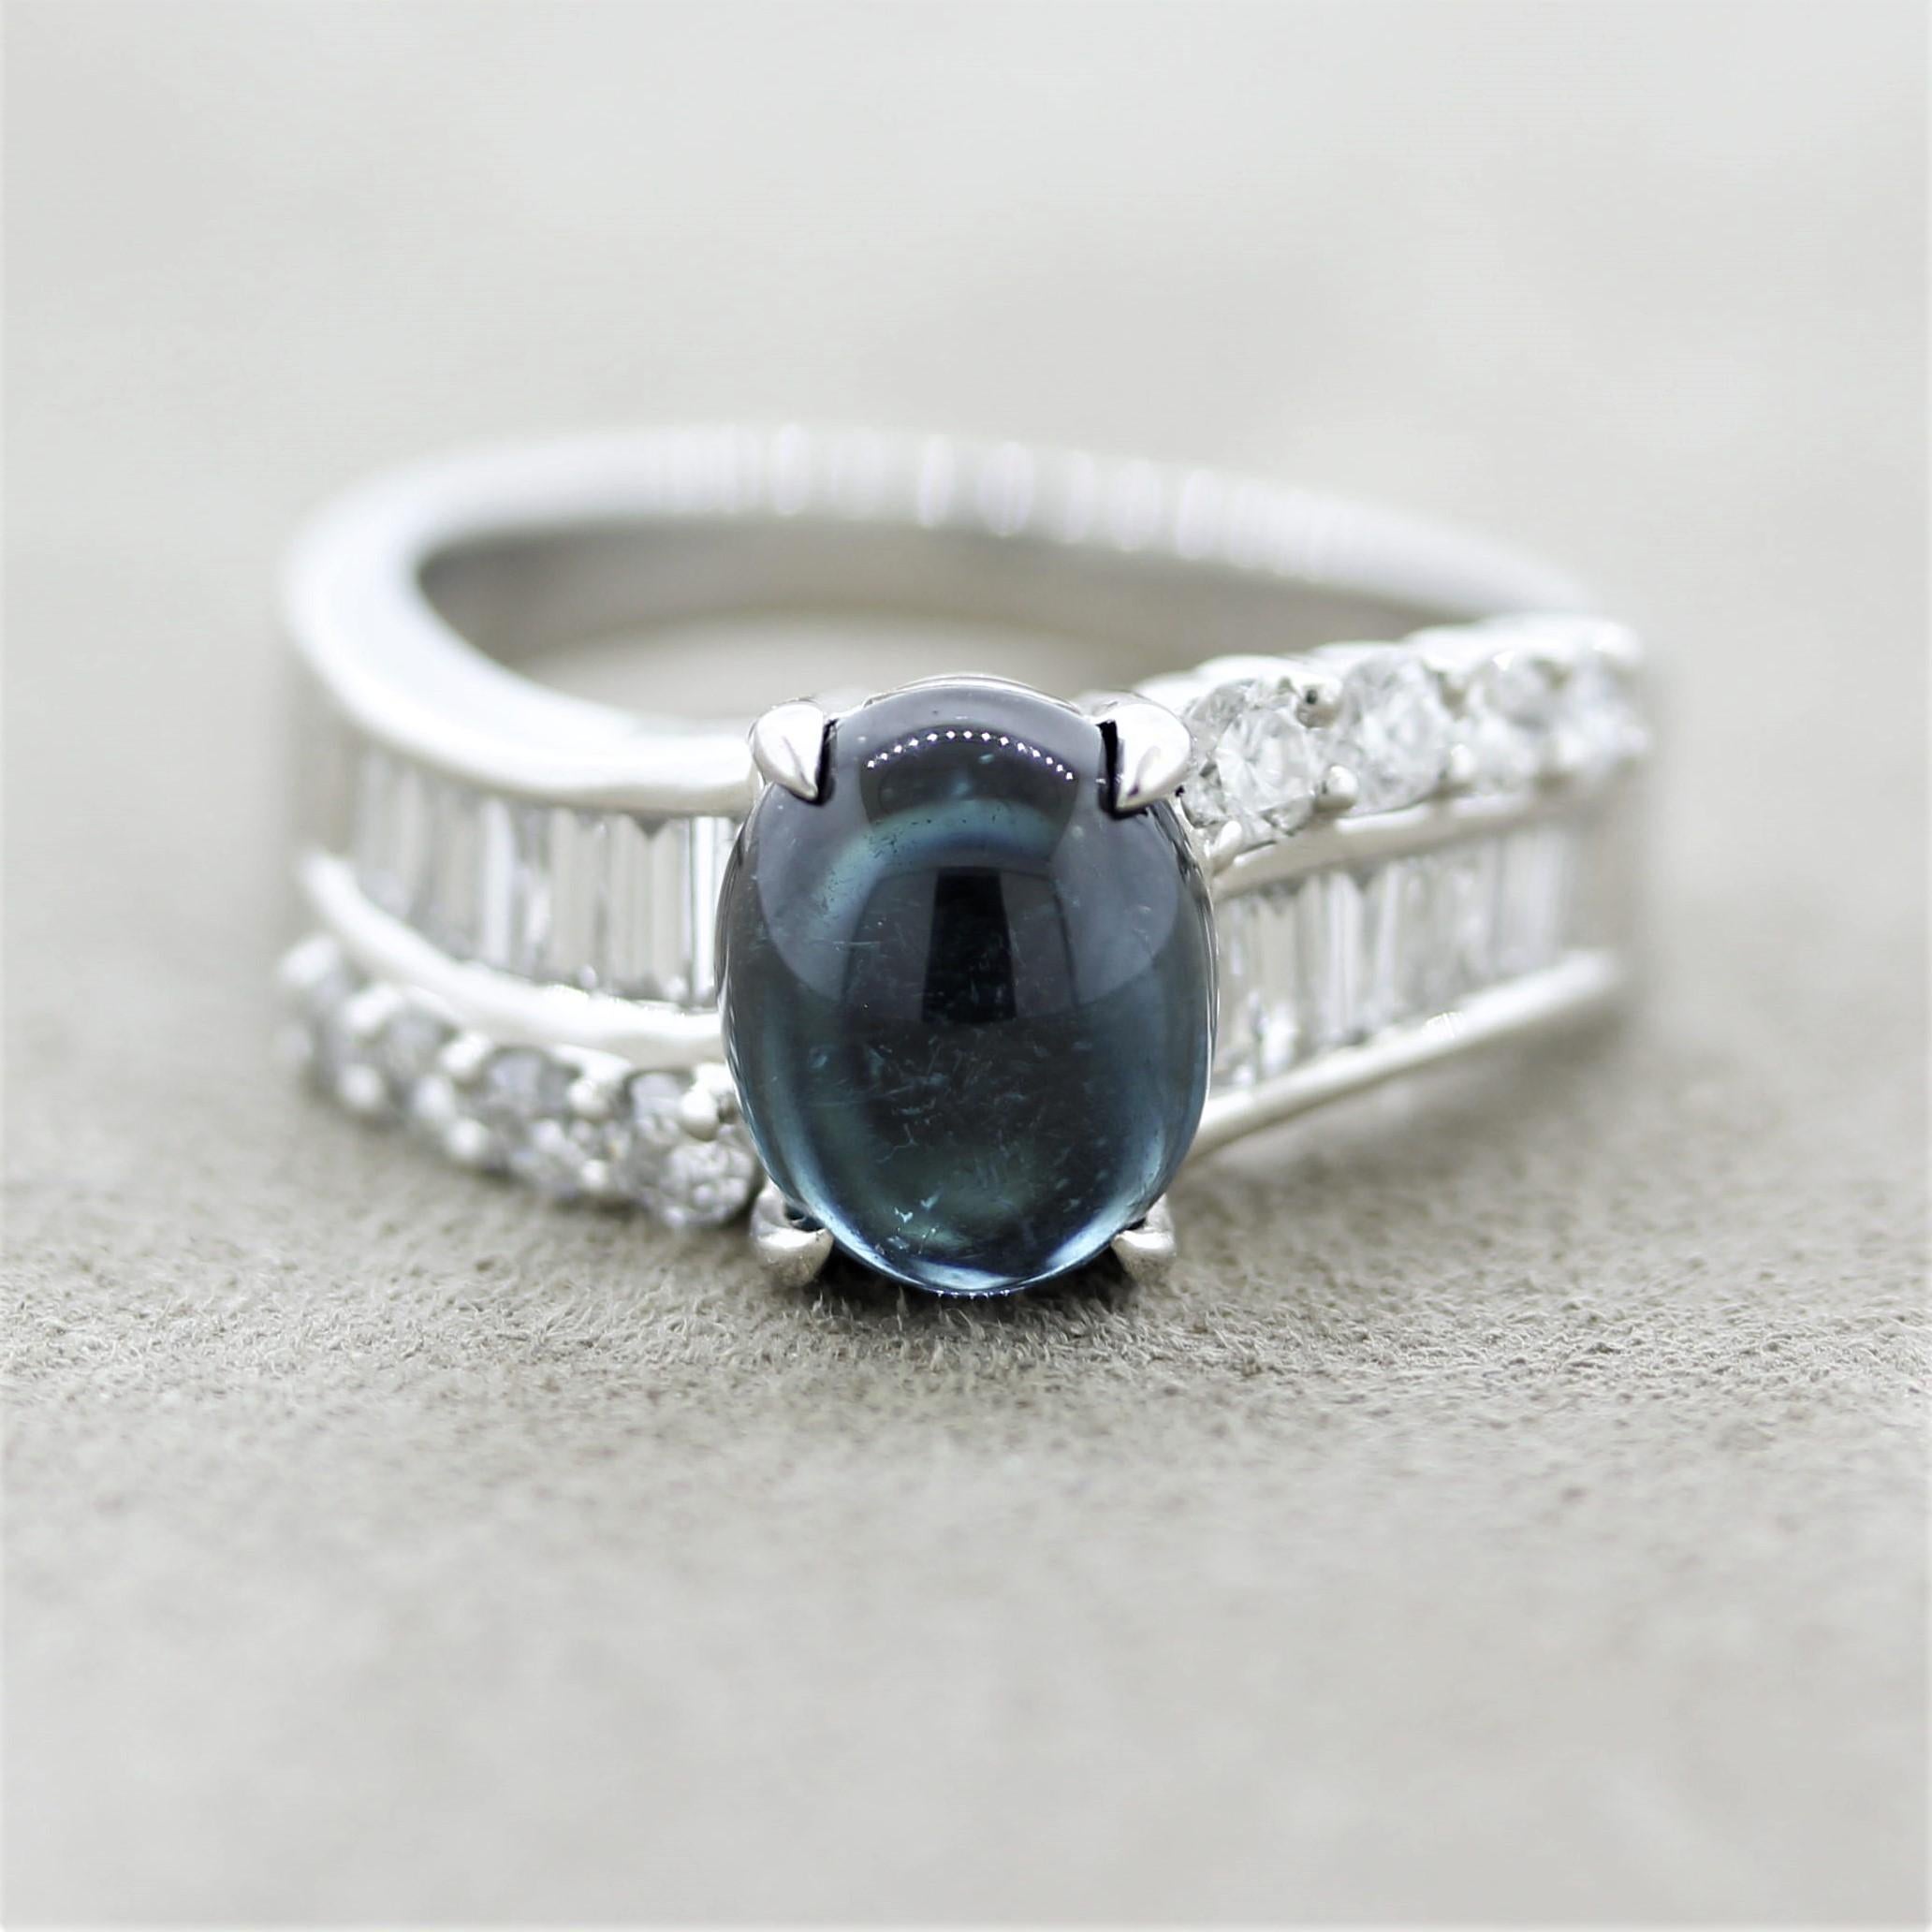 A sleek and sexy platinum ring featuring a gem cabochon tourmaline. It weighs 2.33 carats and has a rich indicolite blue color. It is accented by two rows of diamonds, baguette, and round brilliant, weighing a total of 0.78 carats. Hand-fabricated